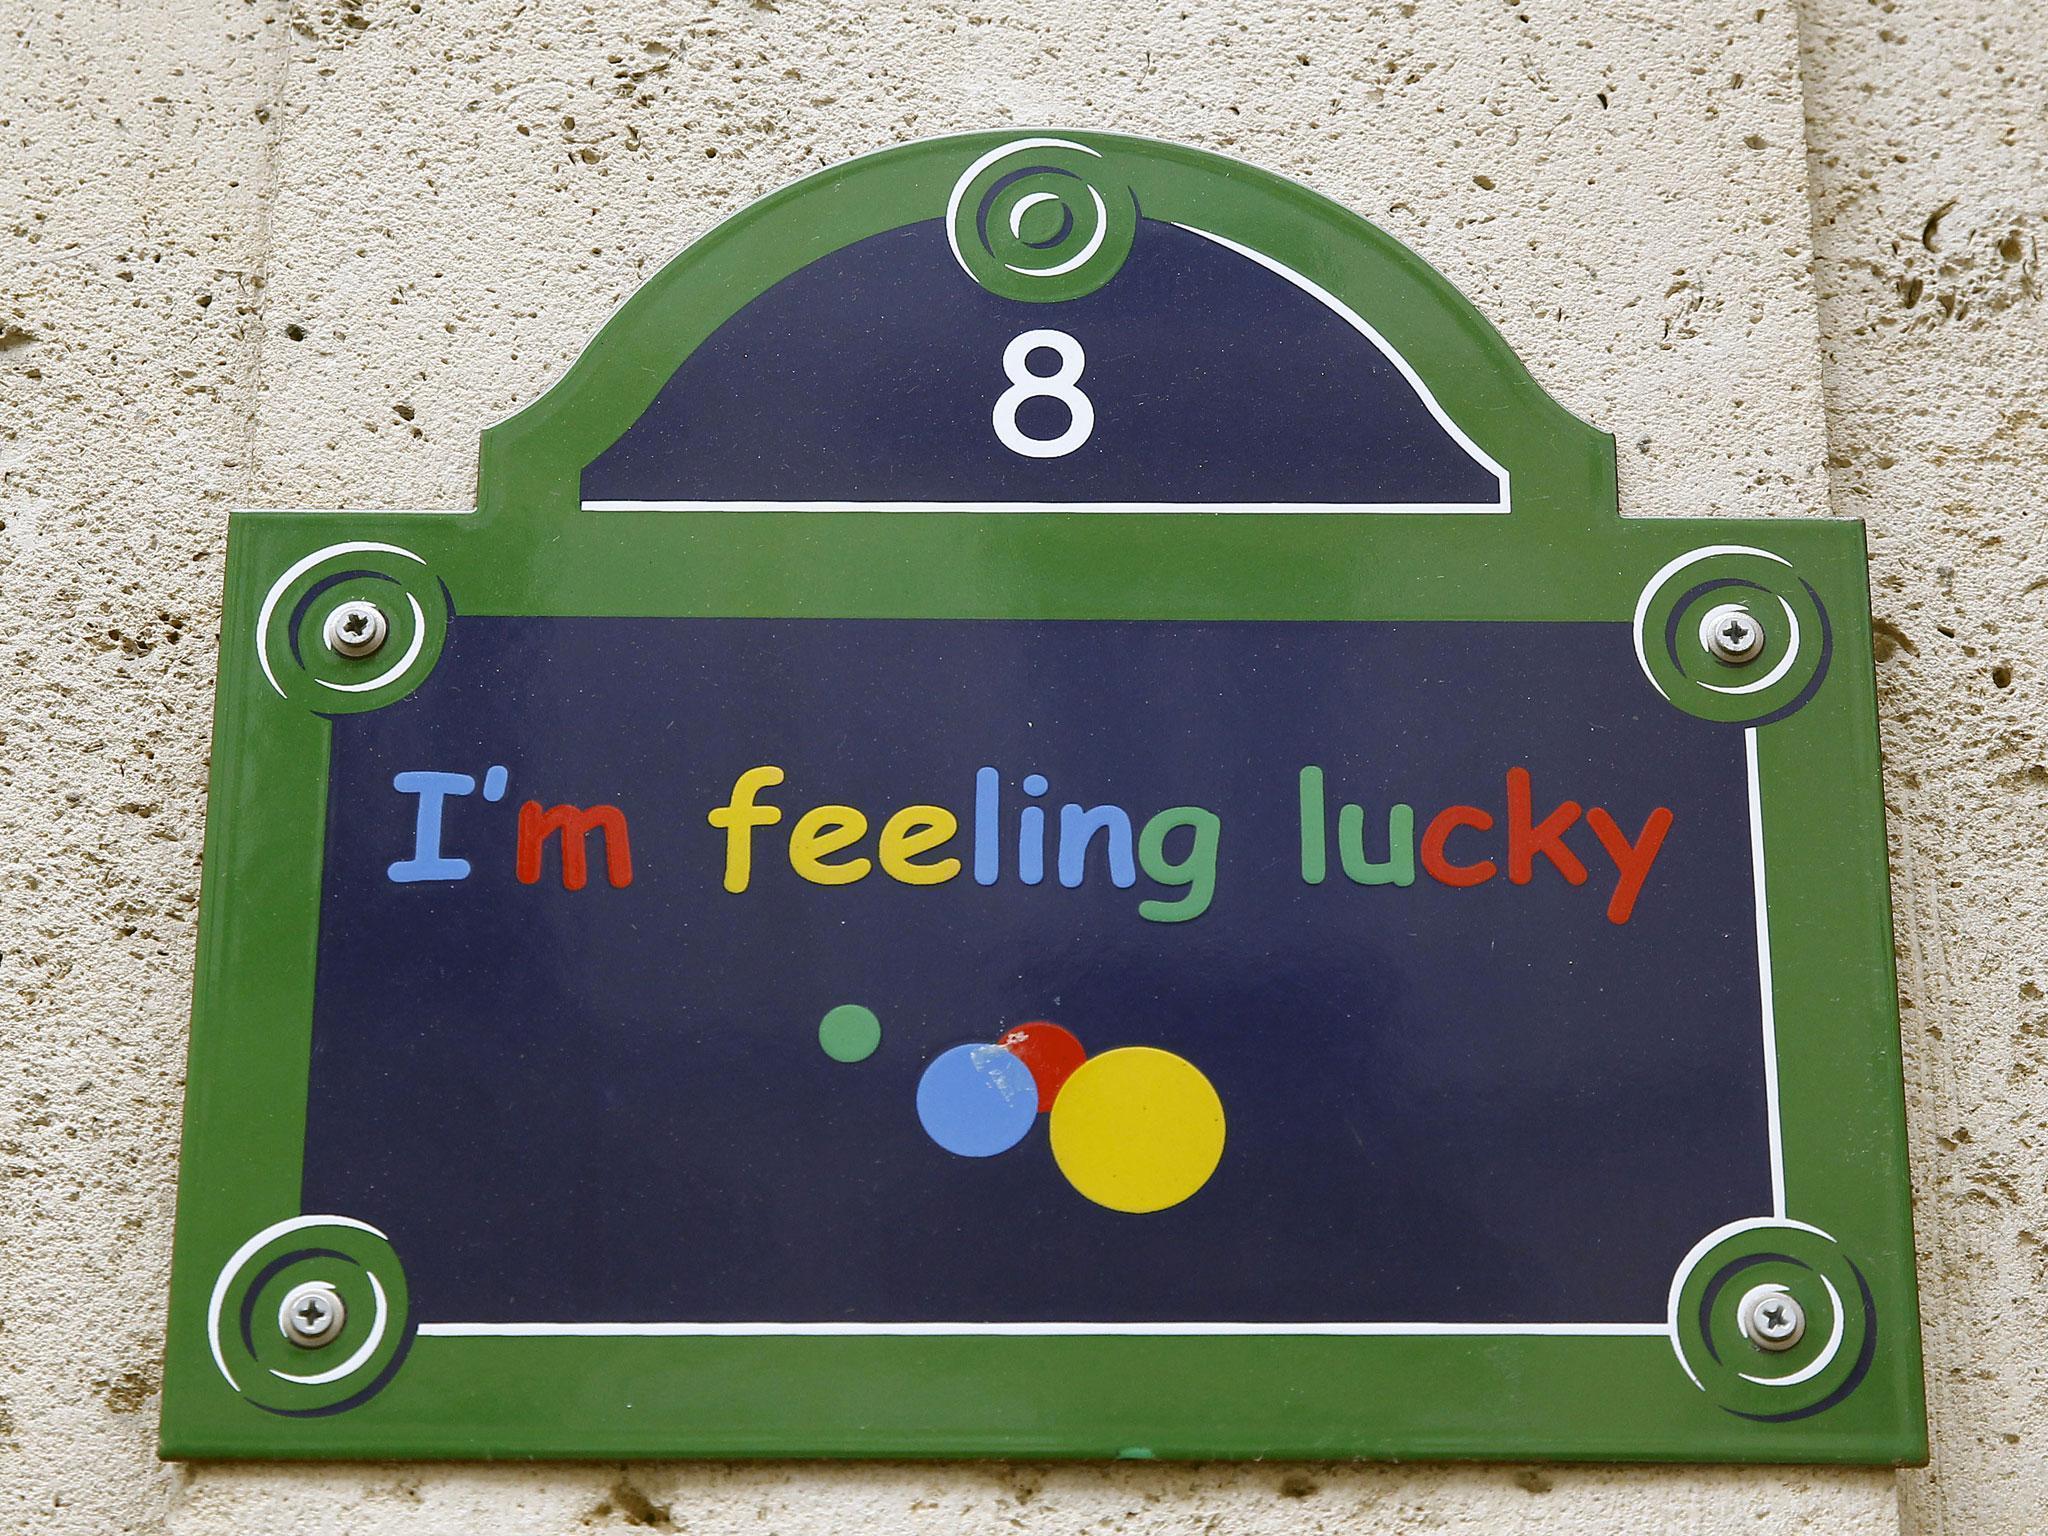 The message 'I'm feeling lucky' is seen on the facade of the entrance of Google's Paris headquarters